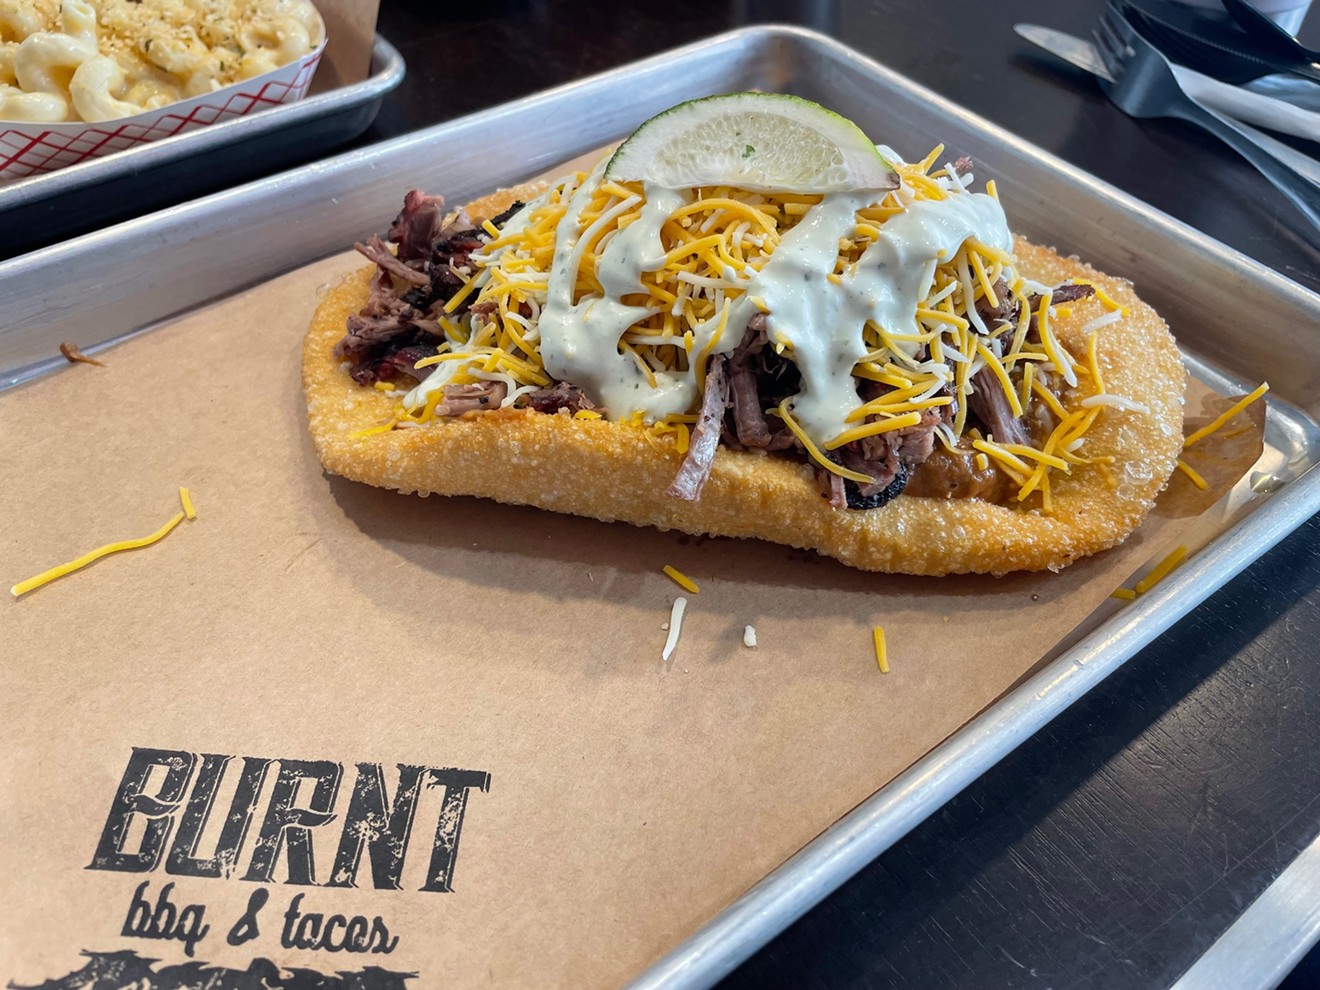 A simple crisp fried bread is topped with beans, brisket and cheese.